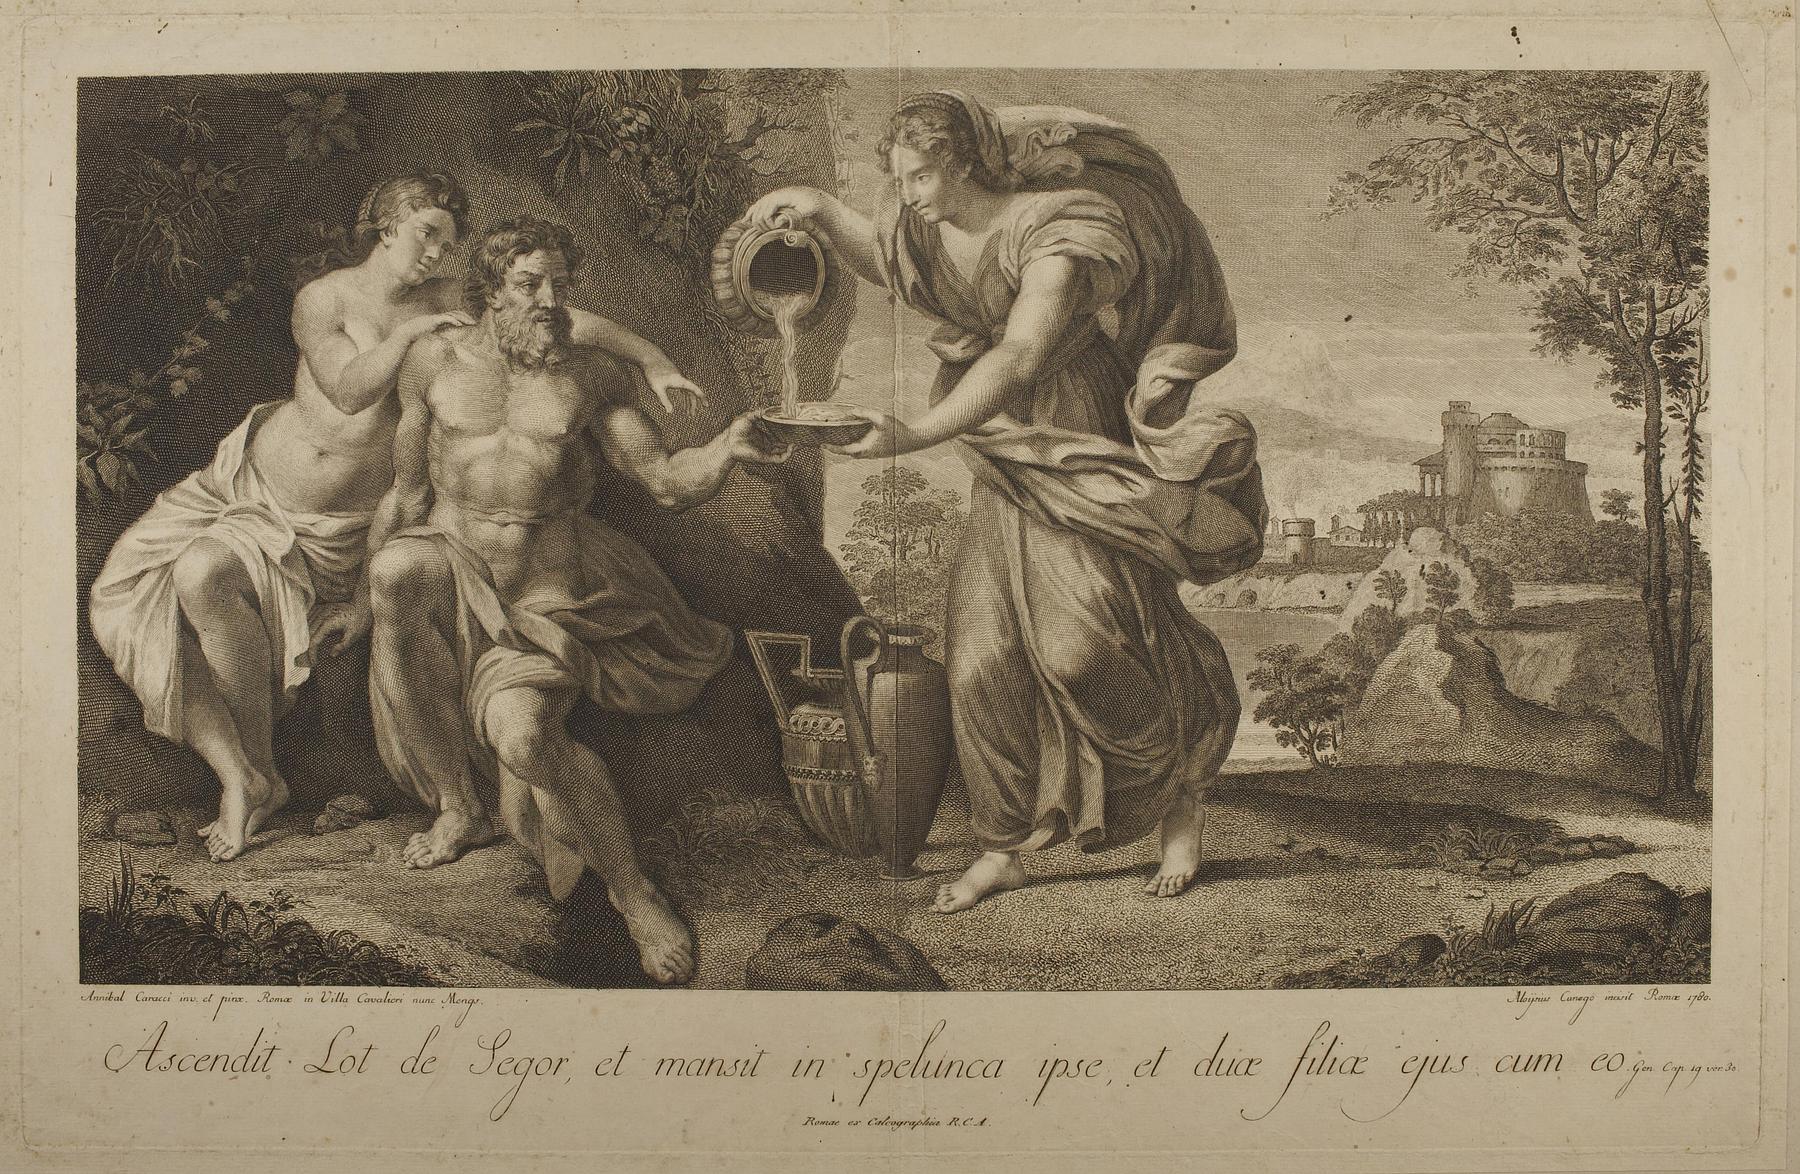 Lot and his Daughters, E495